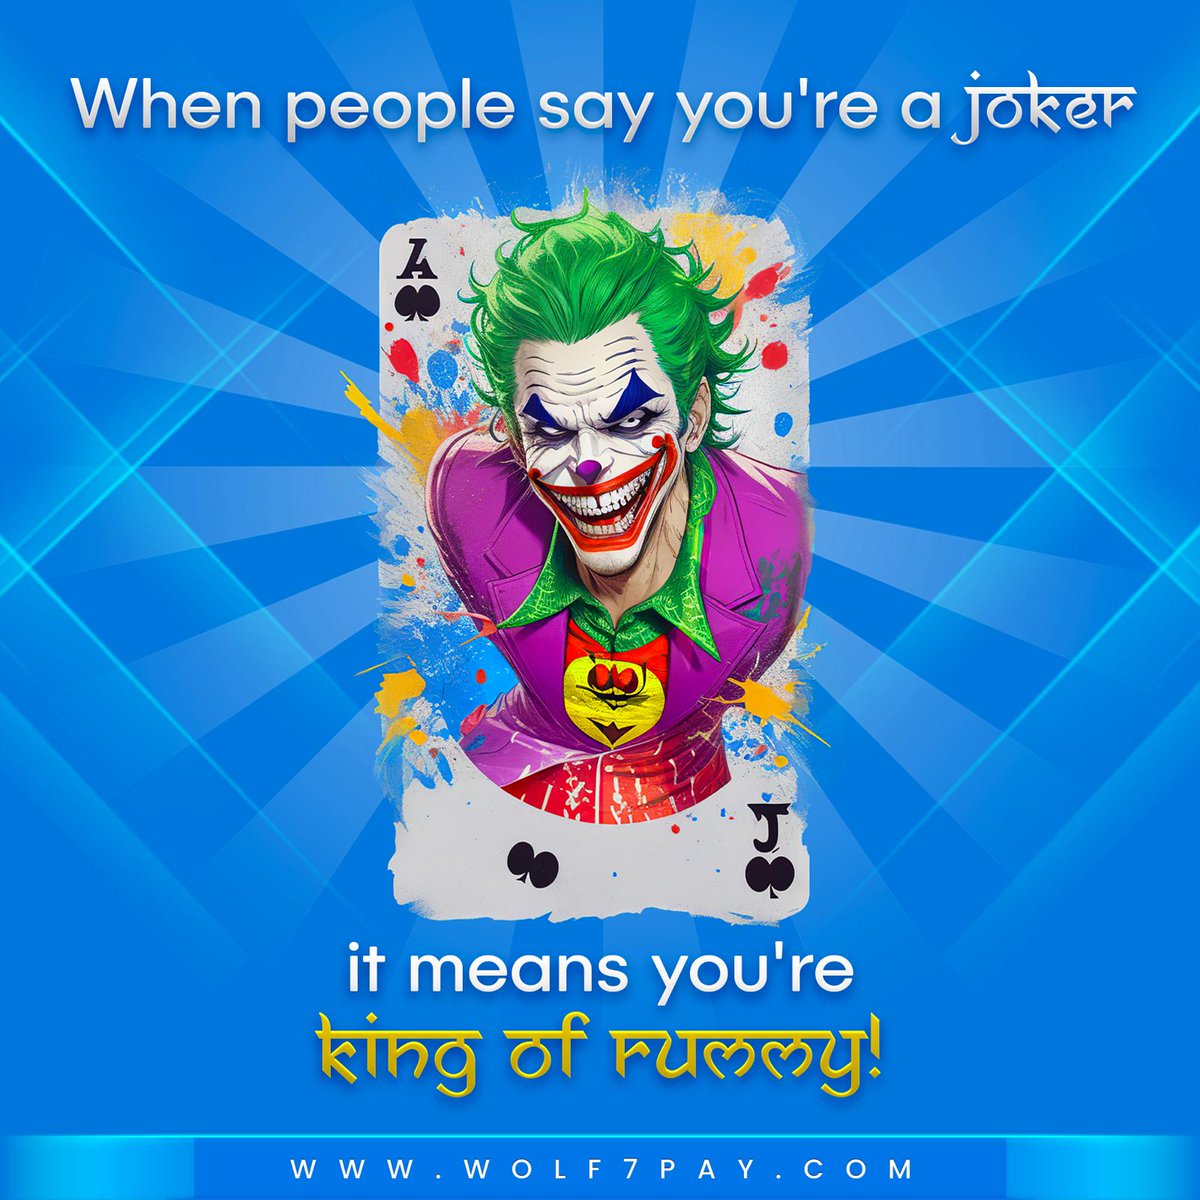 Playing Rummy with the Joker card always brings a twist of excitement! 🃏😄

#wolf7pay #Joker #Rummy #PlayRummy #CardGames